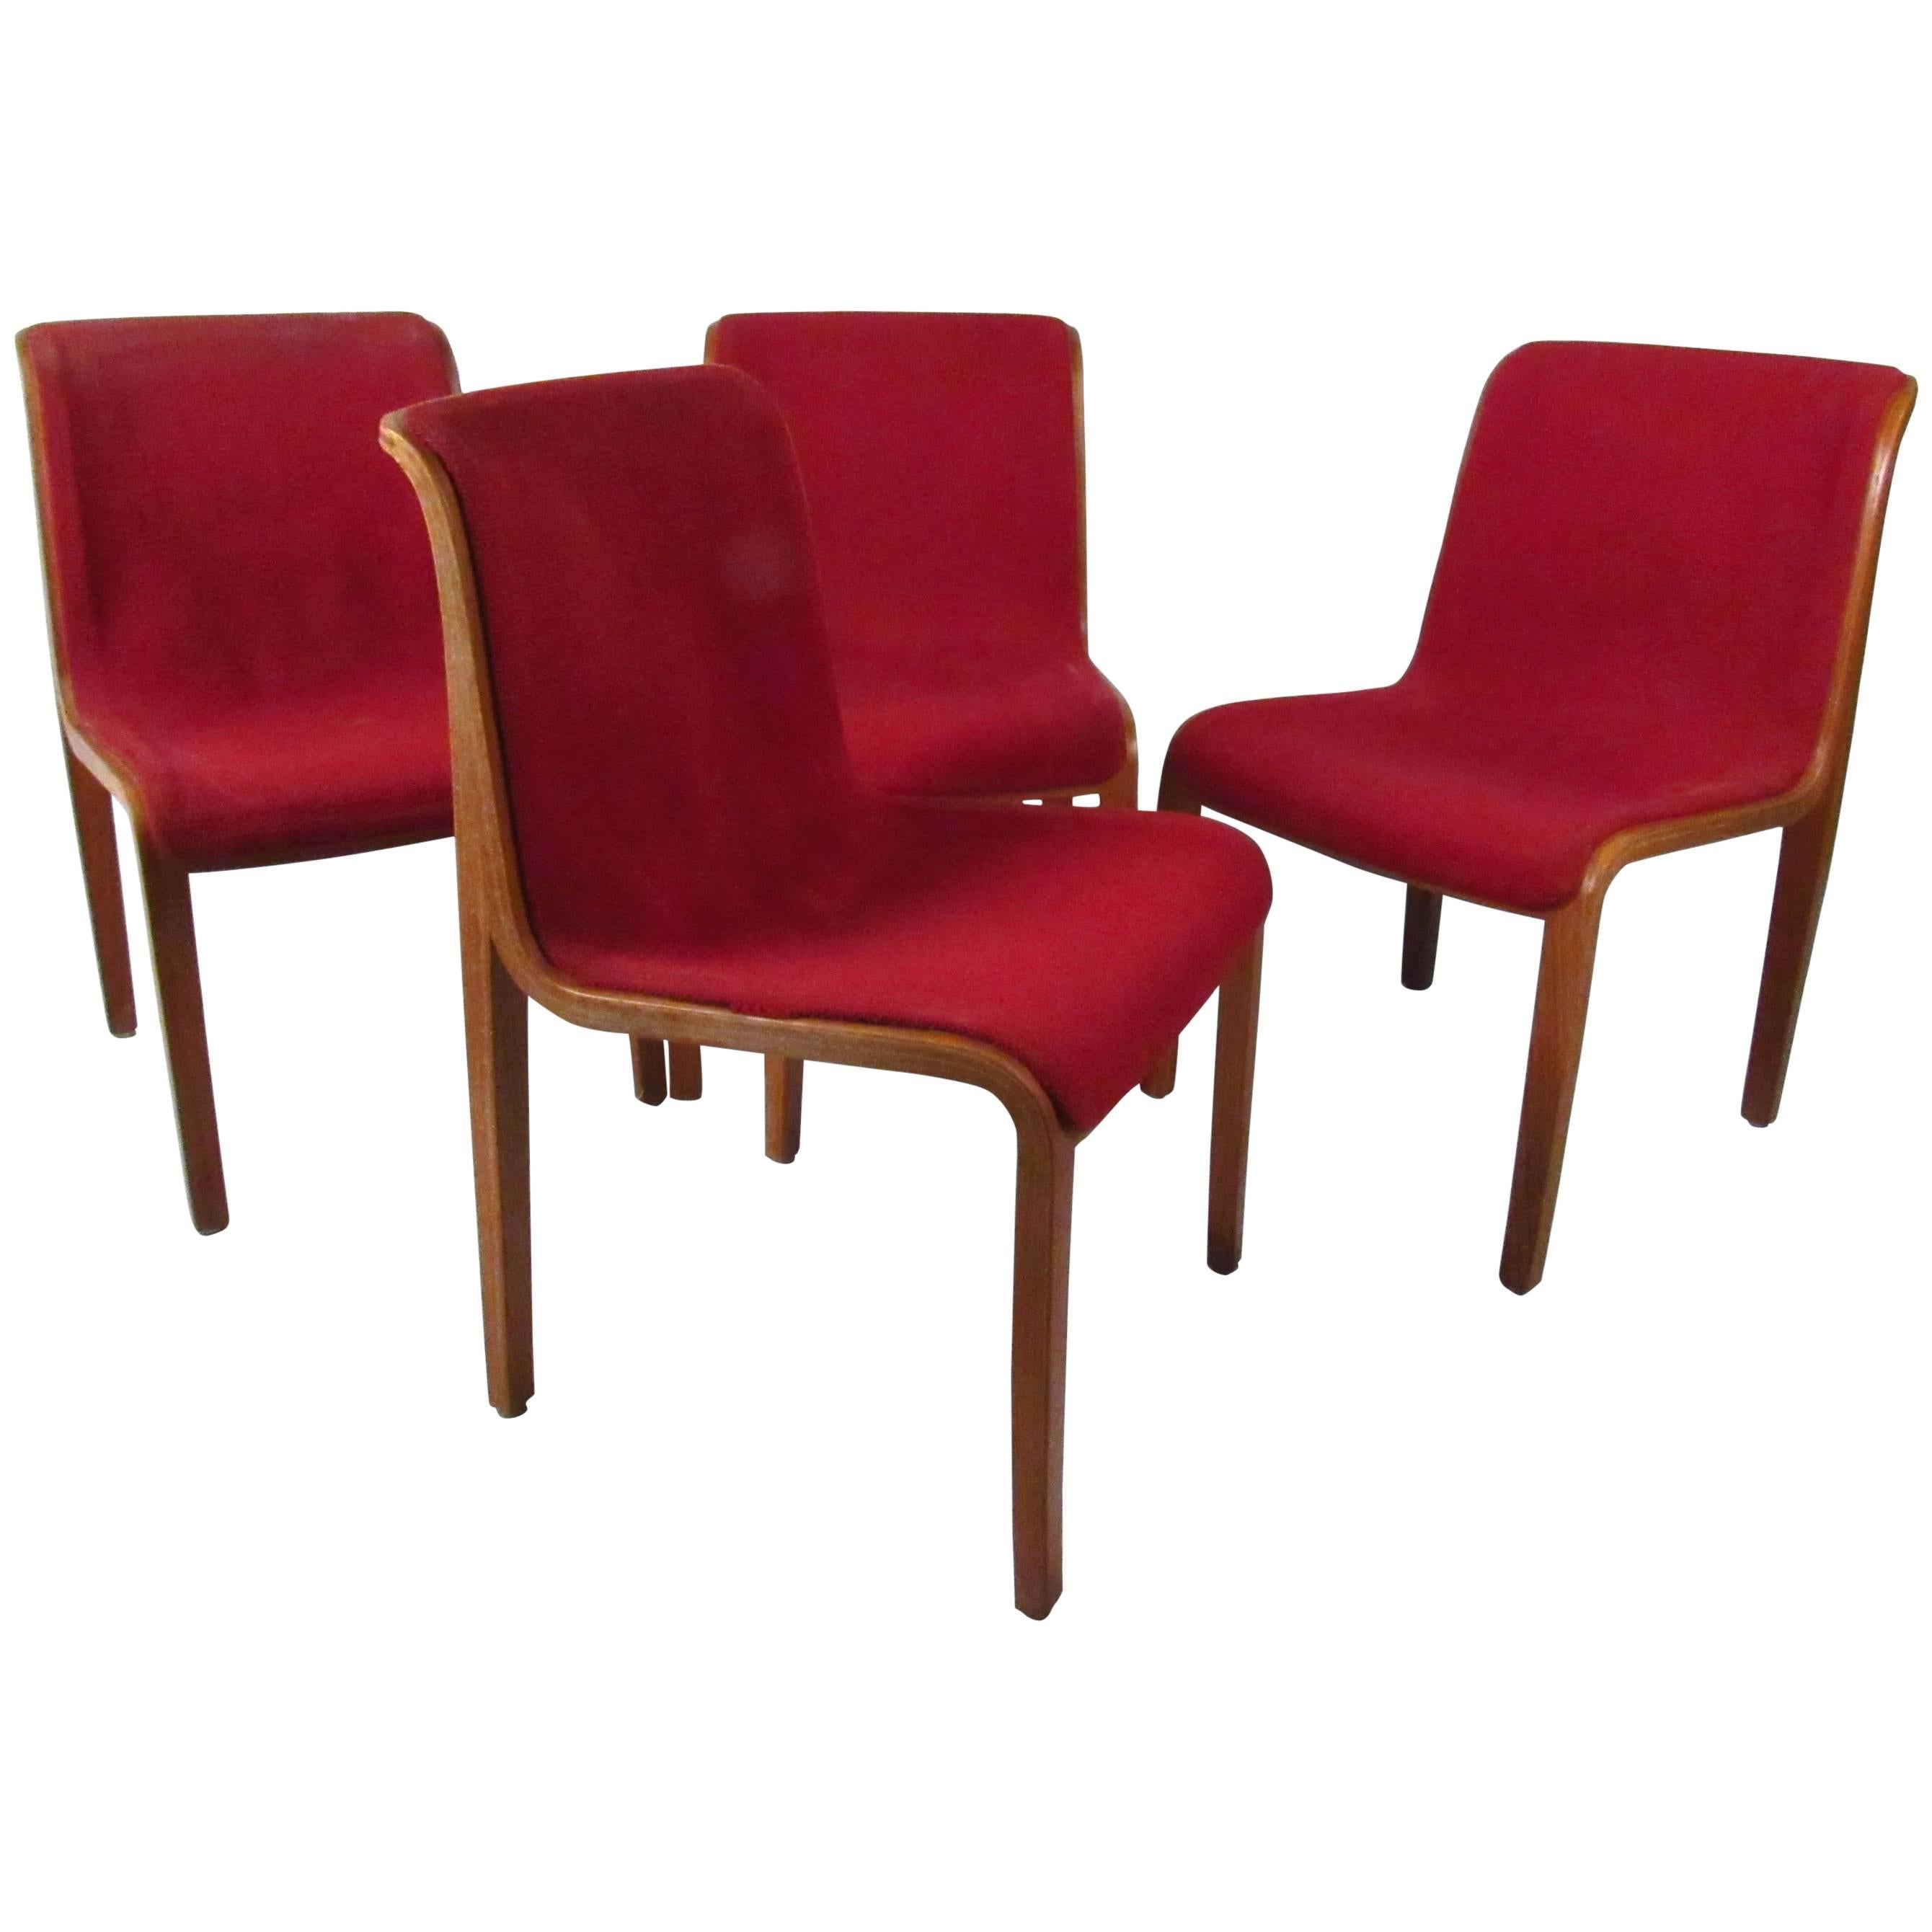 Set of Midcentury Side Chairs by Bill Stephens for Knoll